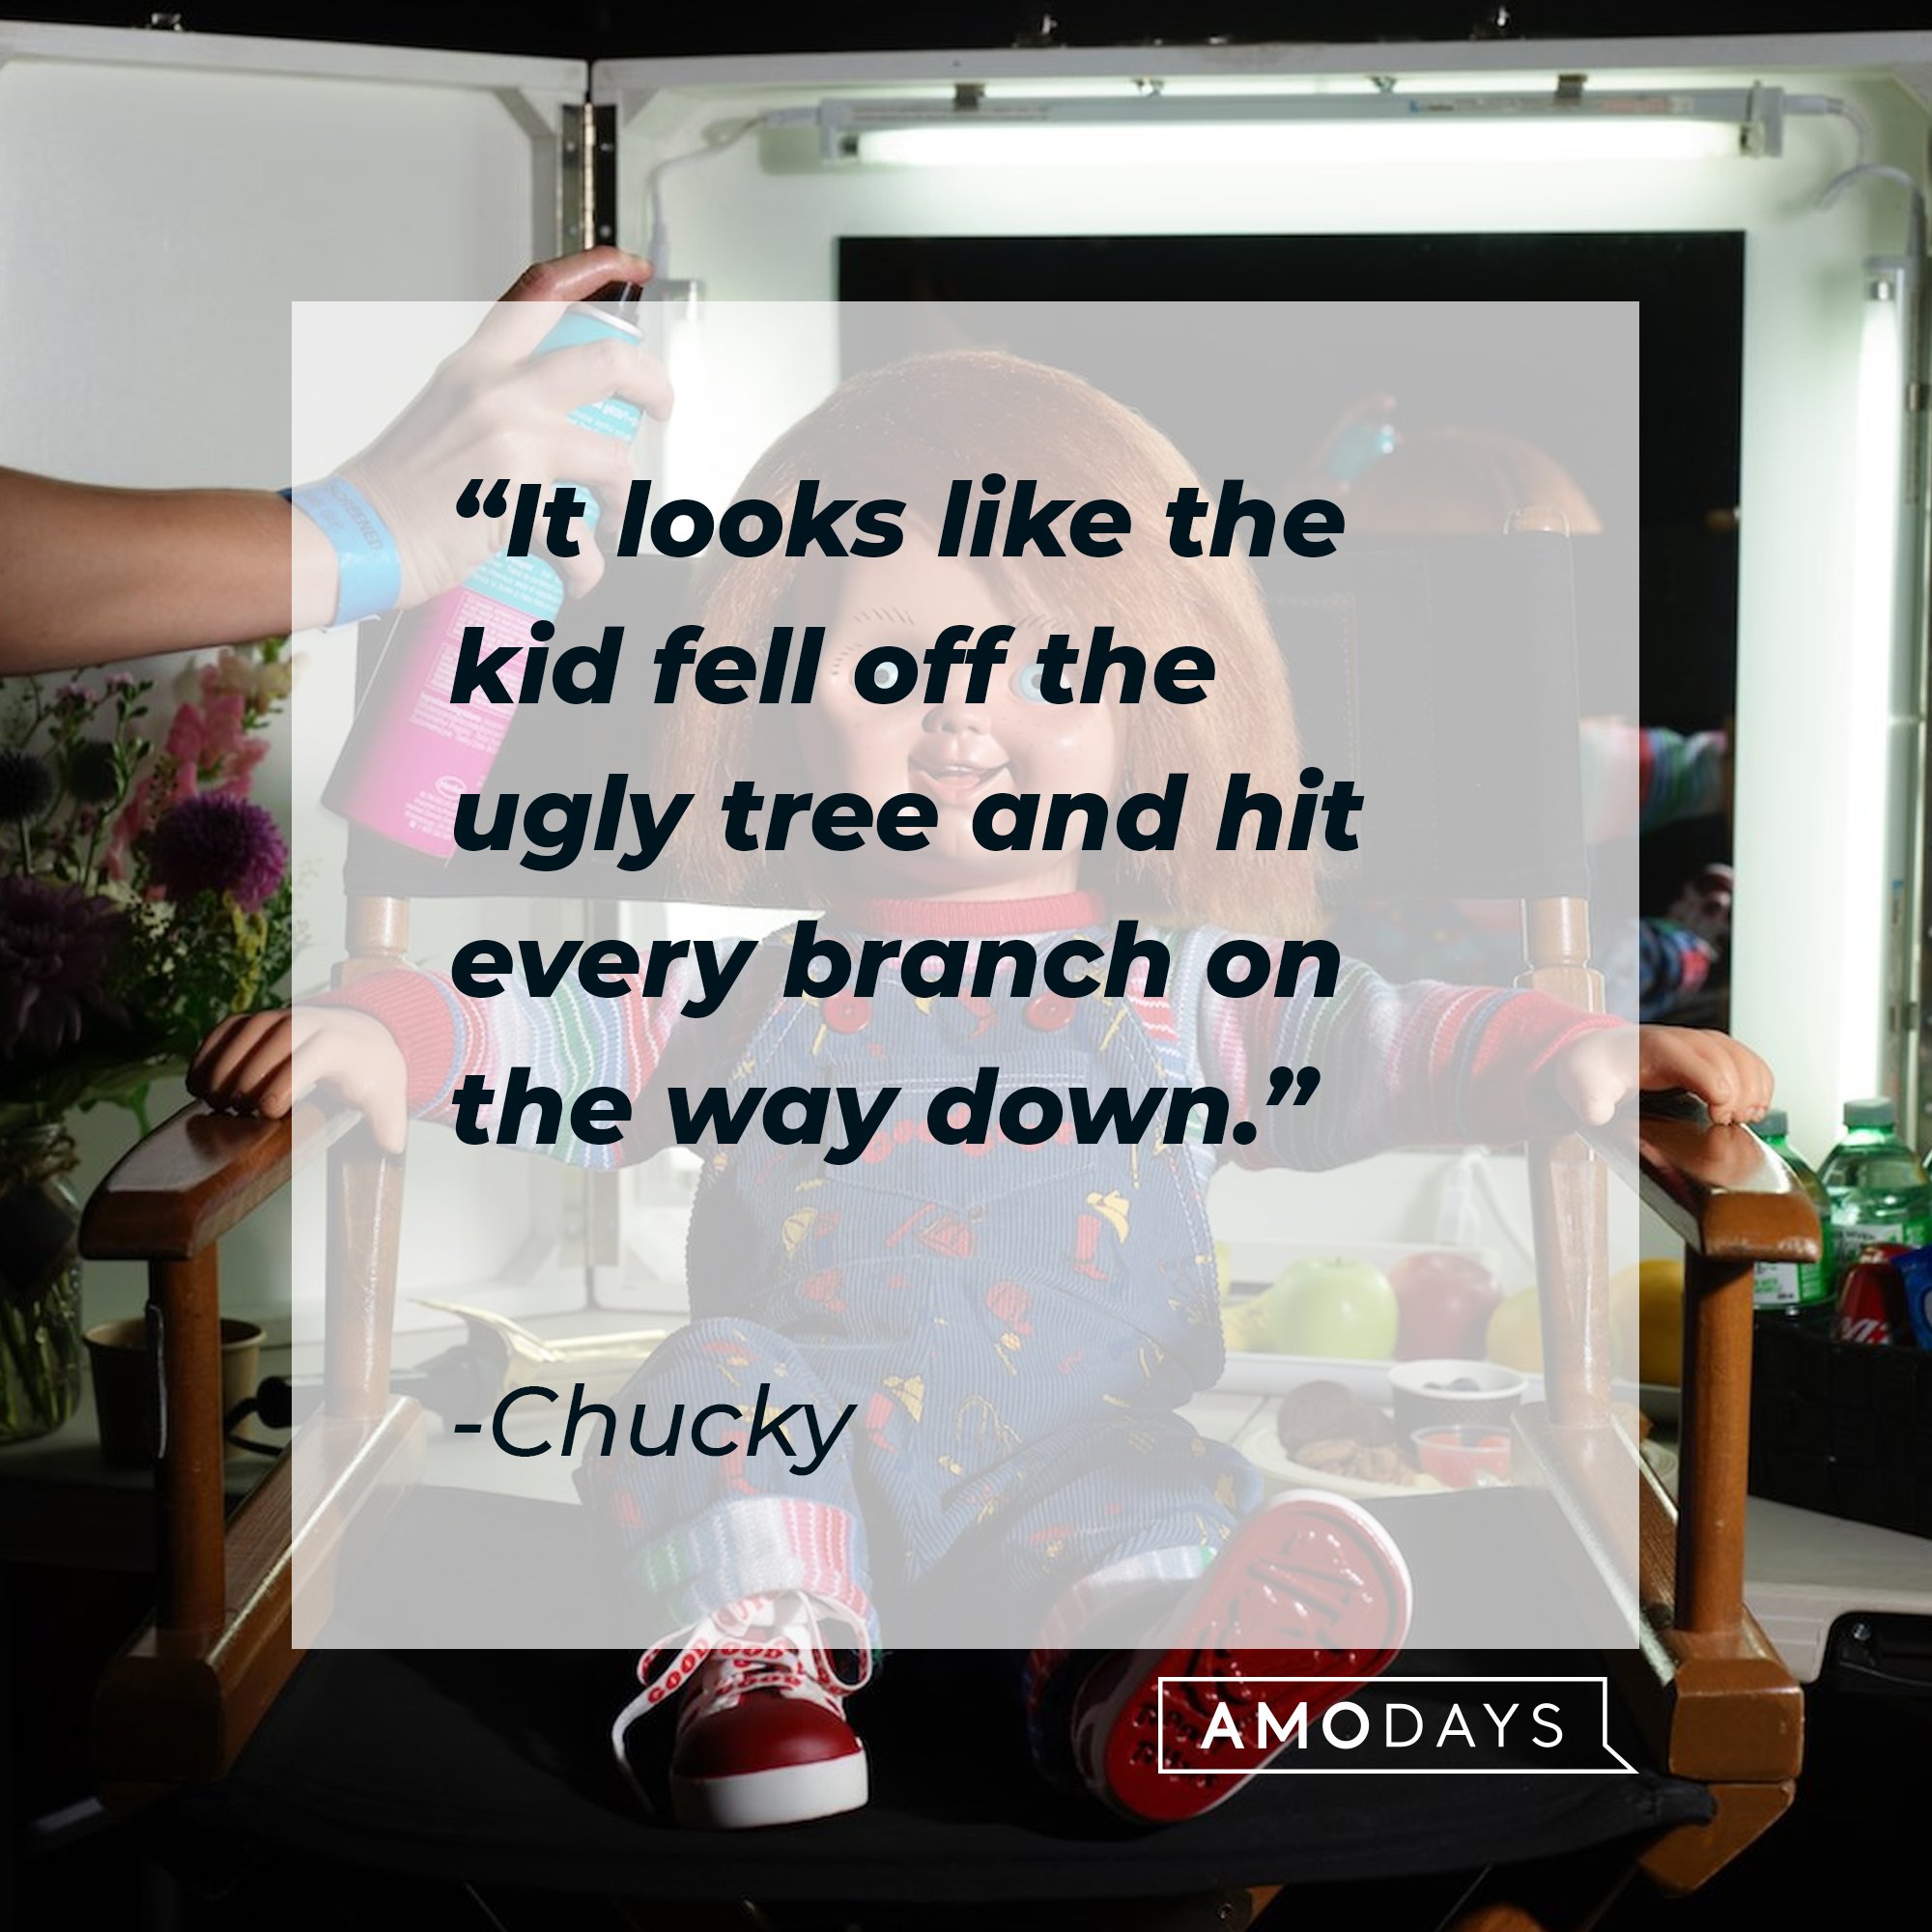 Chucky's quote: "It looks like the kid fell off the ugly tree and hit every branch on the way down.” | Image: AmoDays